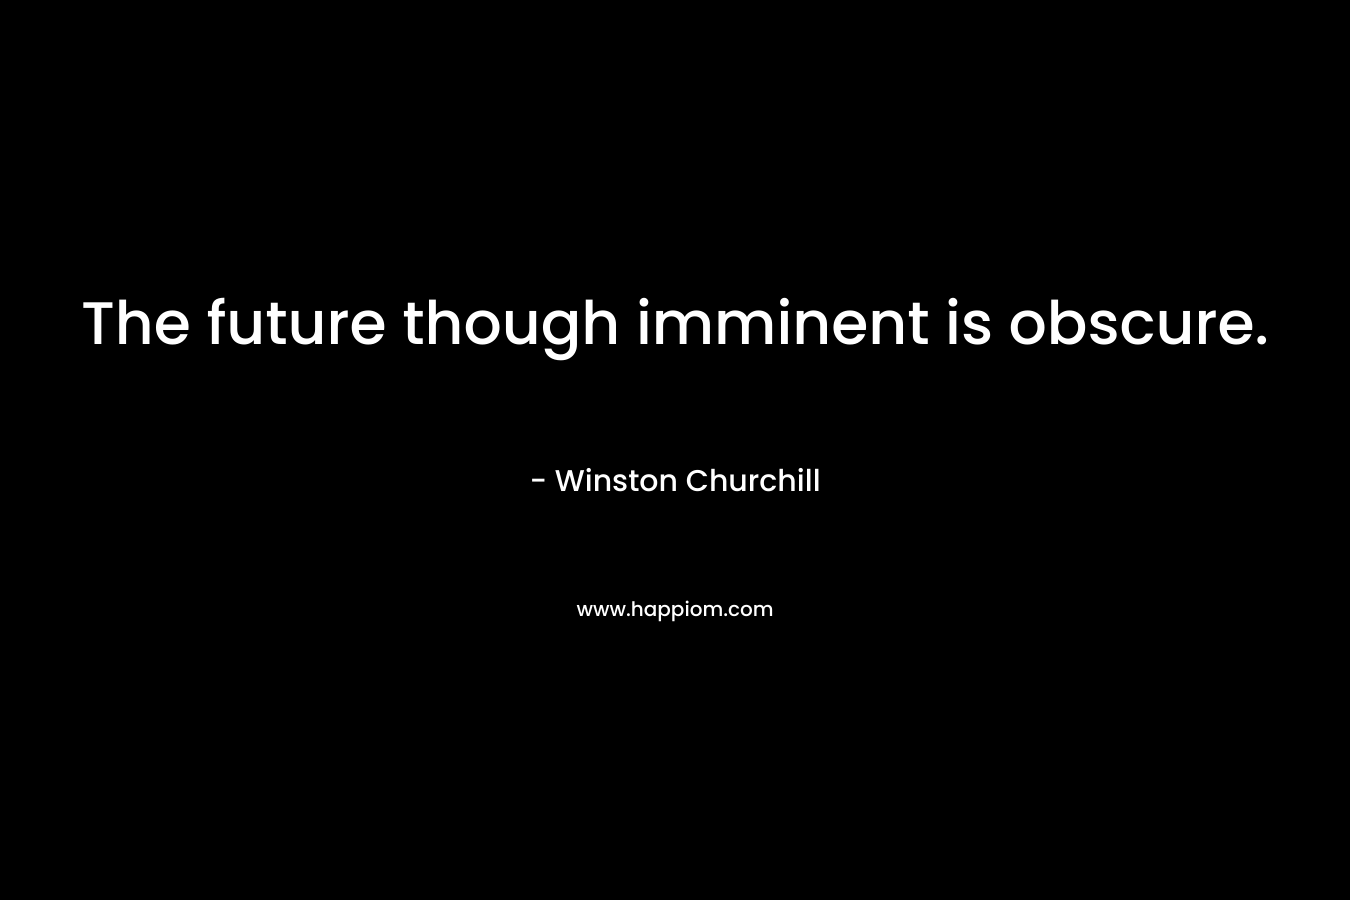 The future though imminent is obscure.